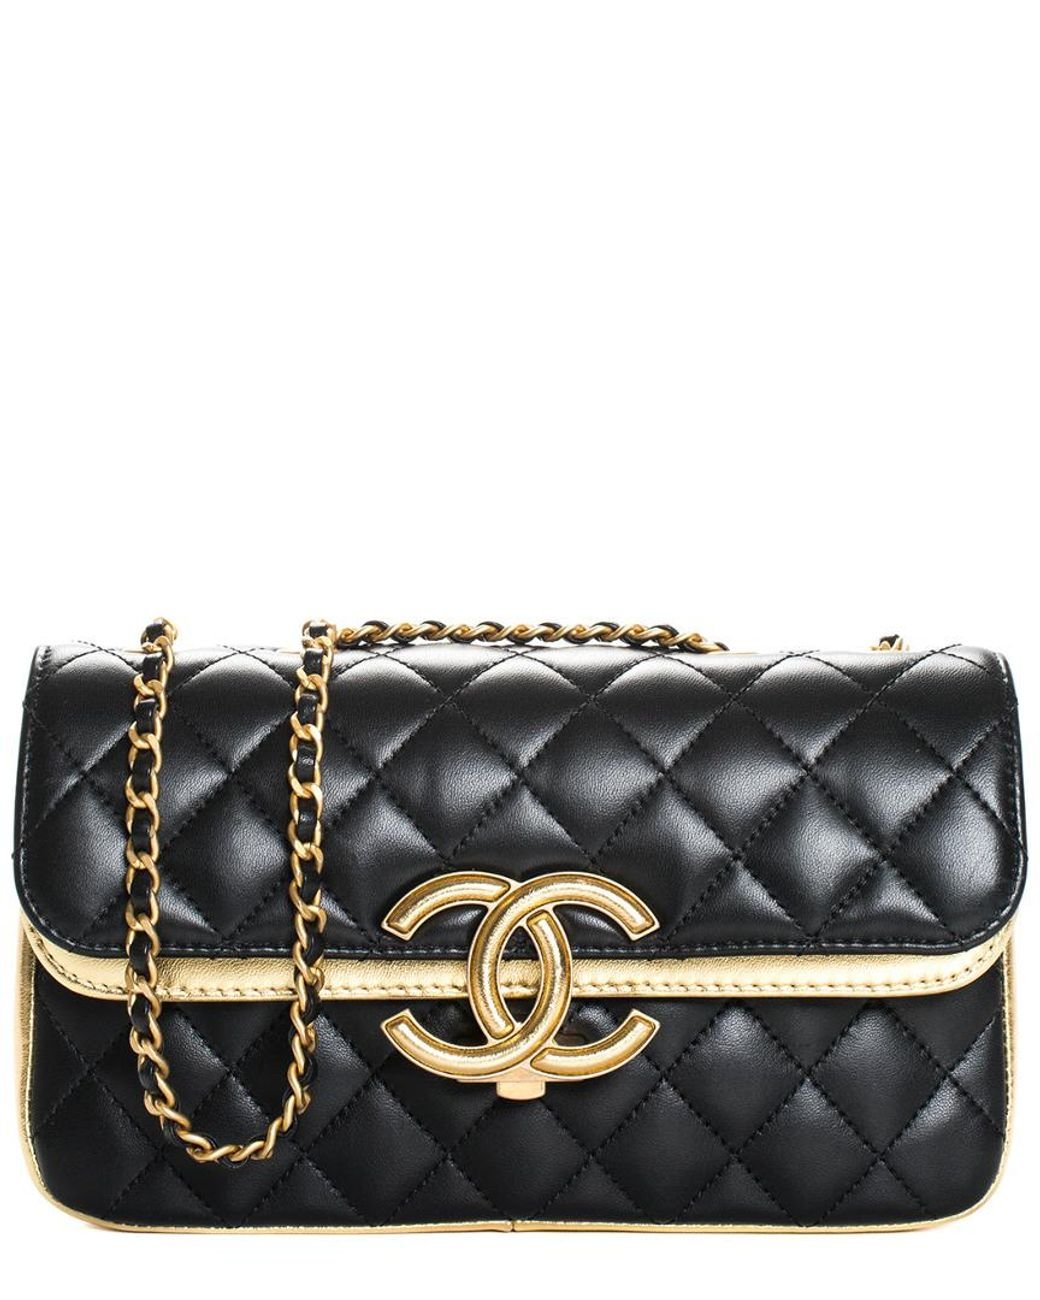 Chanel Black & Gold Quilted Leather Cc Chic Flap Bag, Never Carried | Lyst